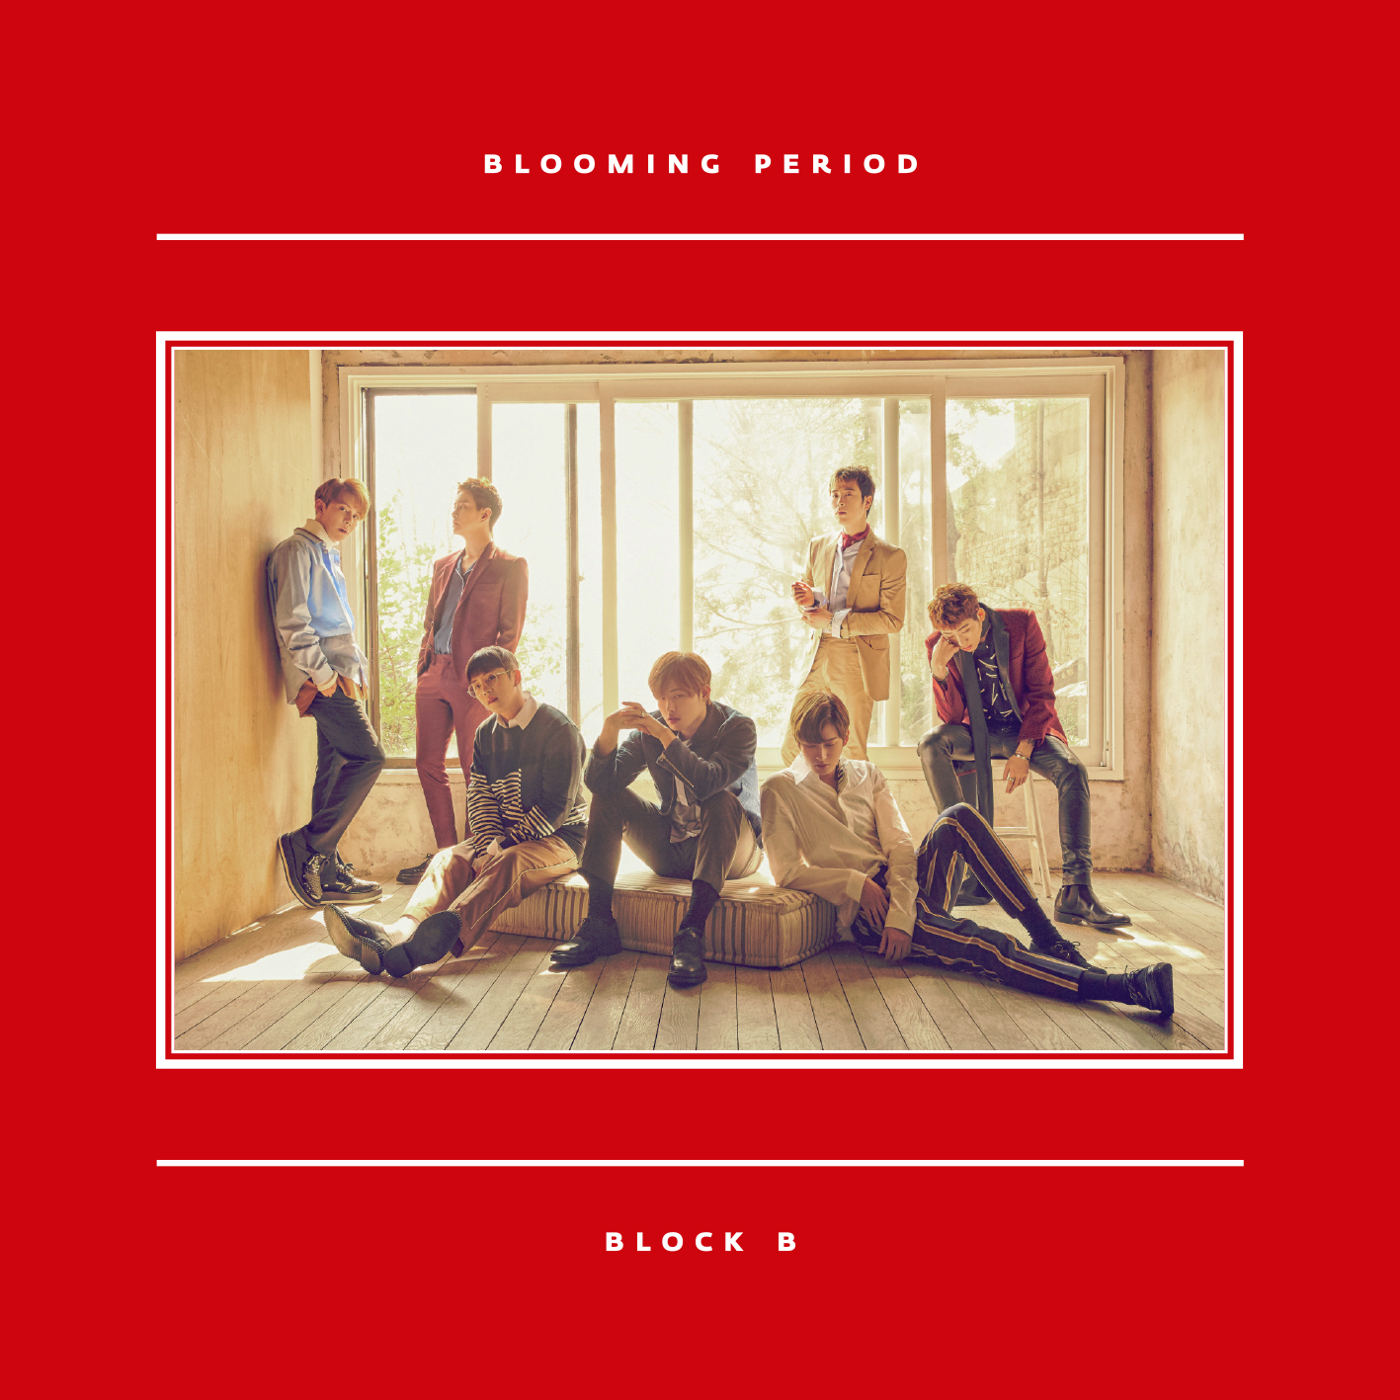 https://static.wikia.nocookie.net/kpop/images/d/db/Block_B_Blooming_Period_cover.png/revision/latest?cb=20160410185635